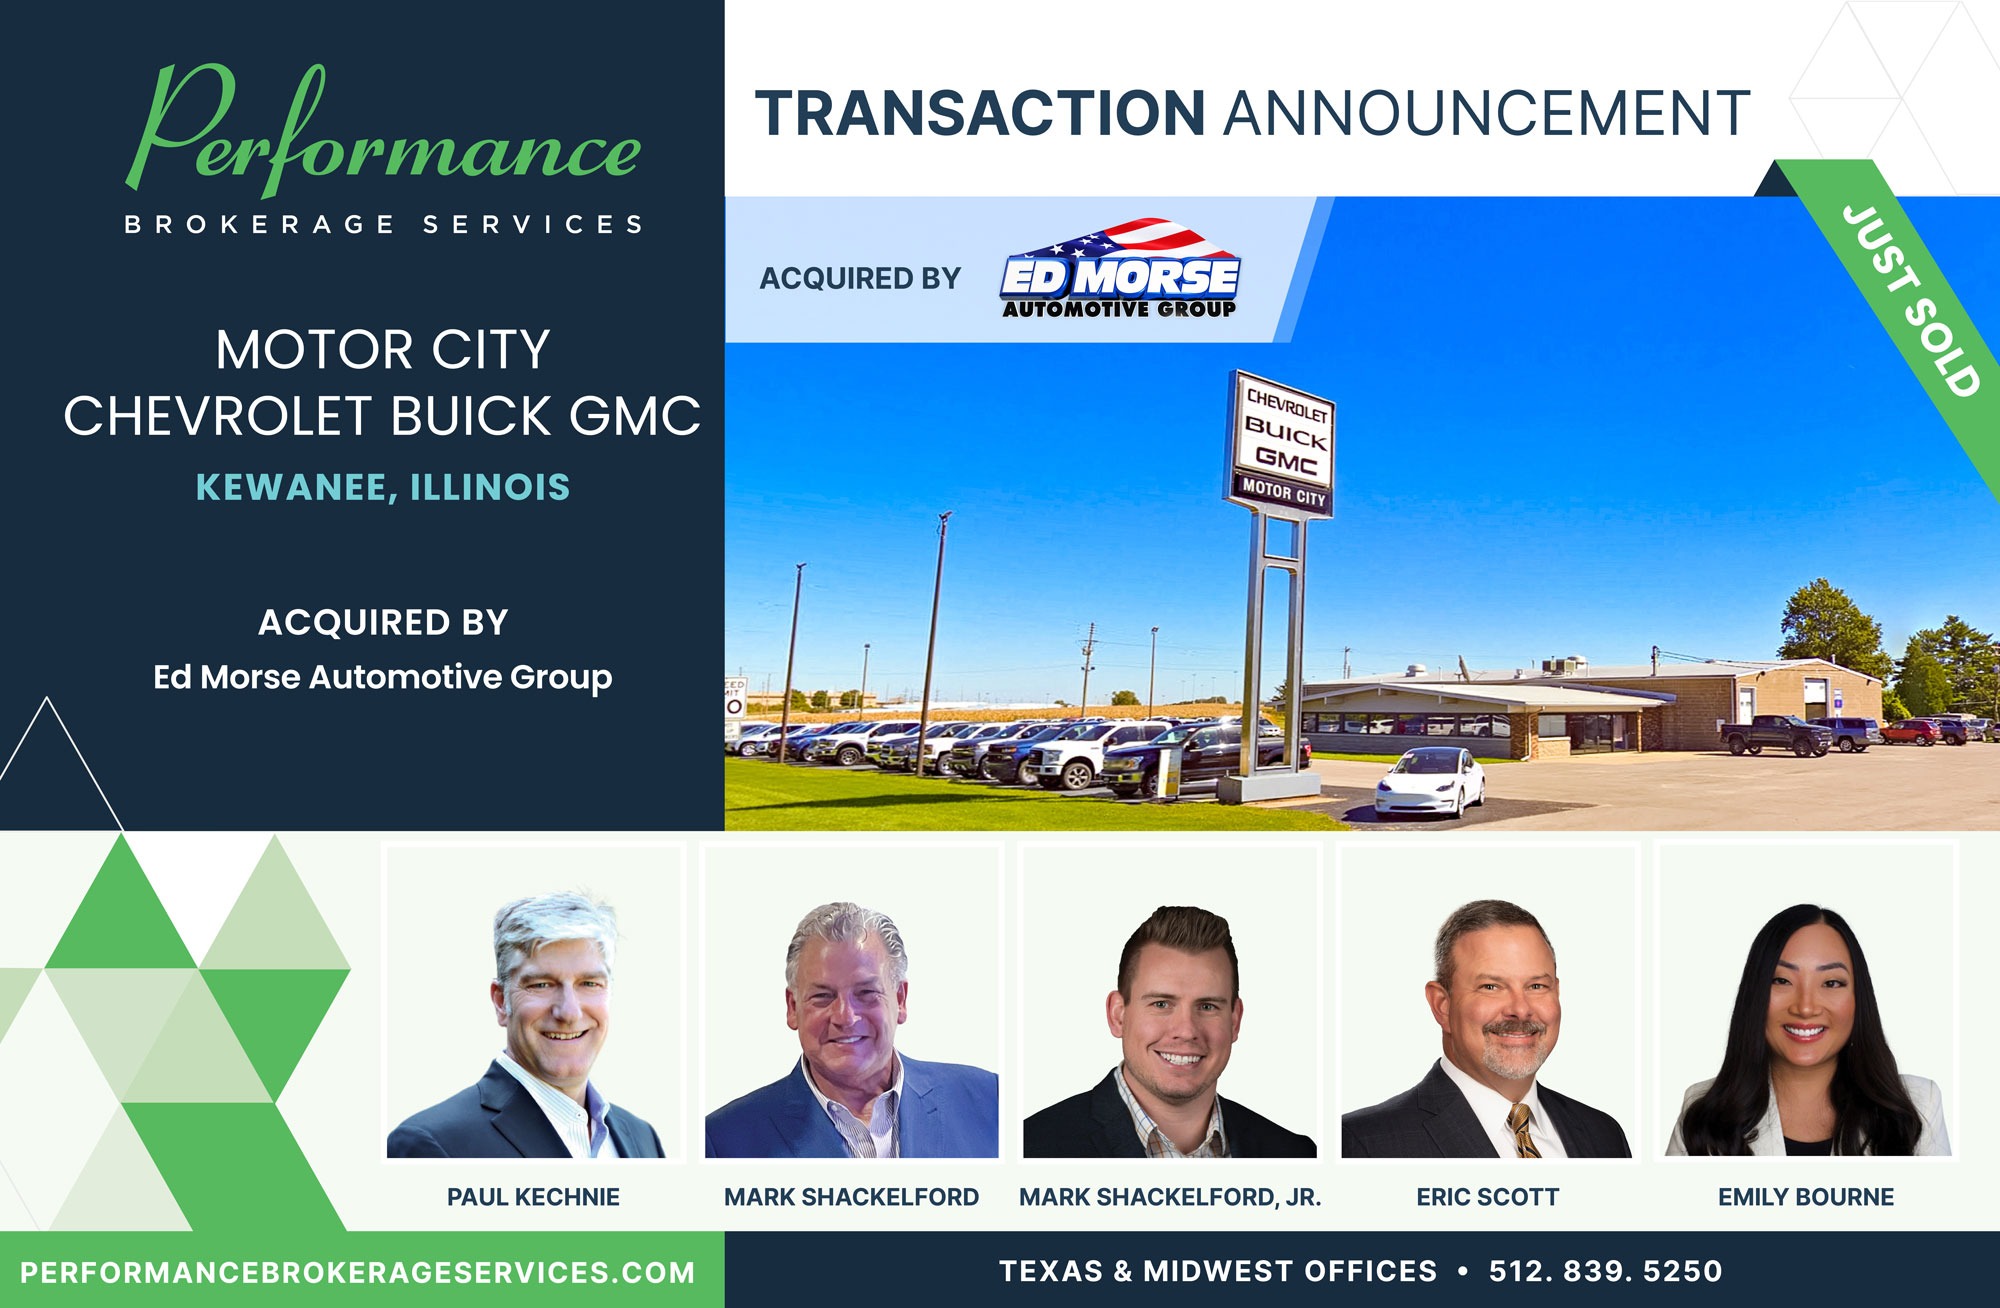 Motor City Chevrolet Buick GMC sold to Ed Morse Automotive Group with Performance Brokerage